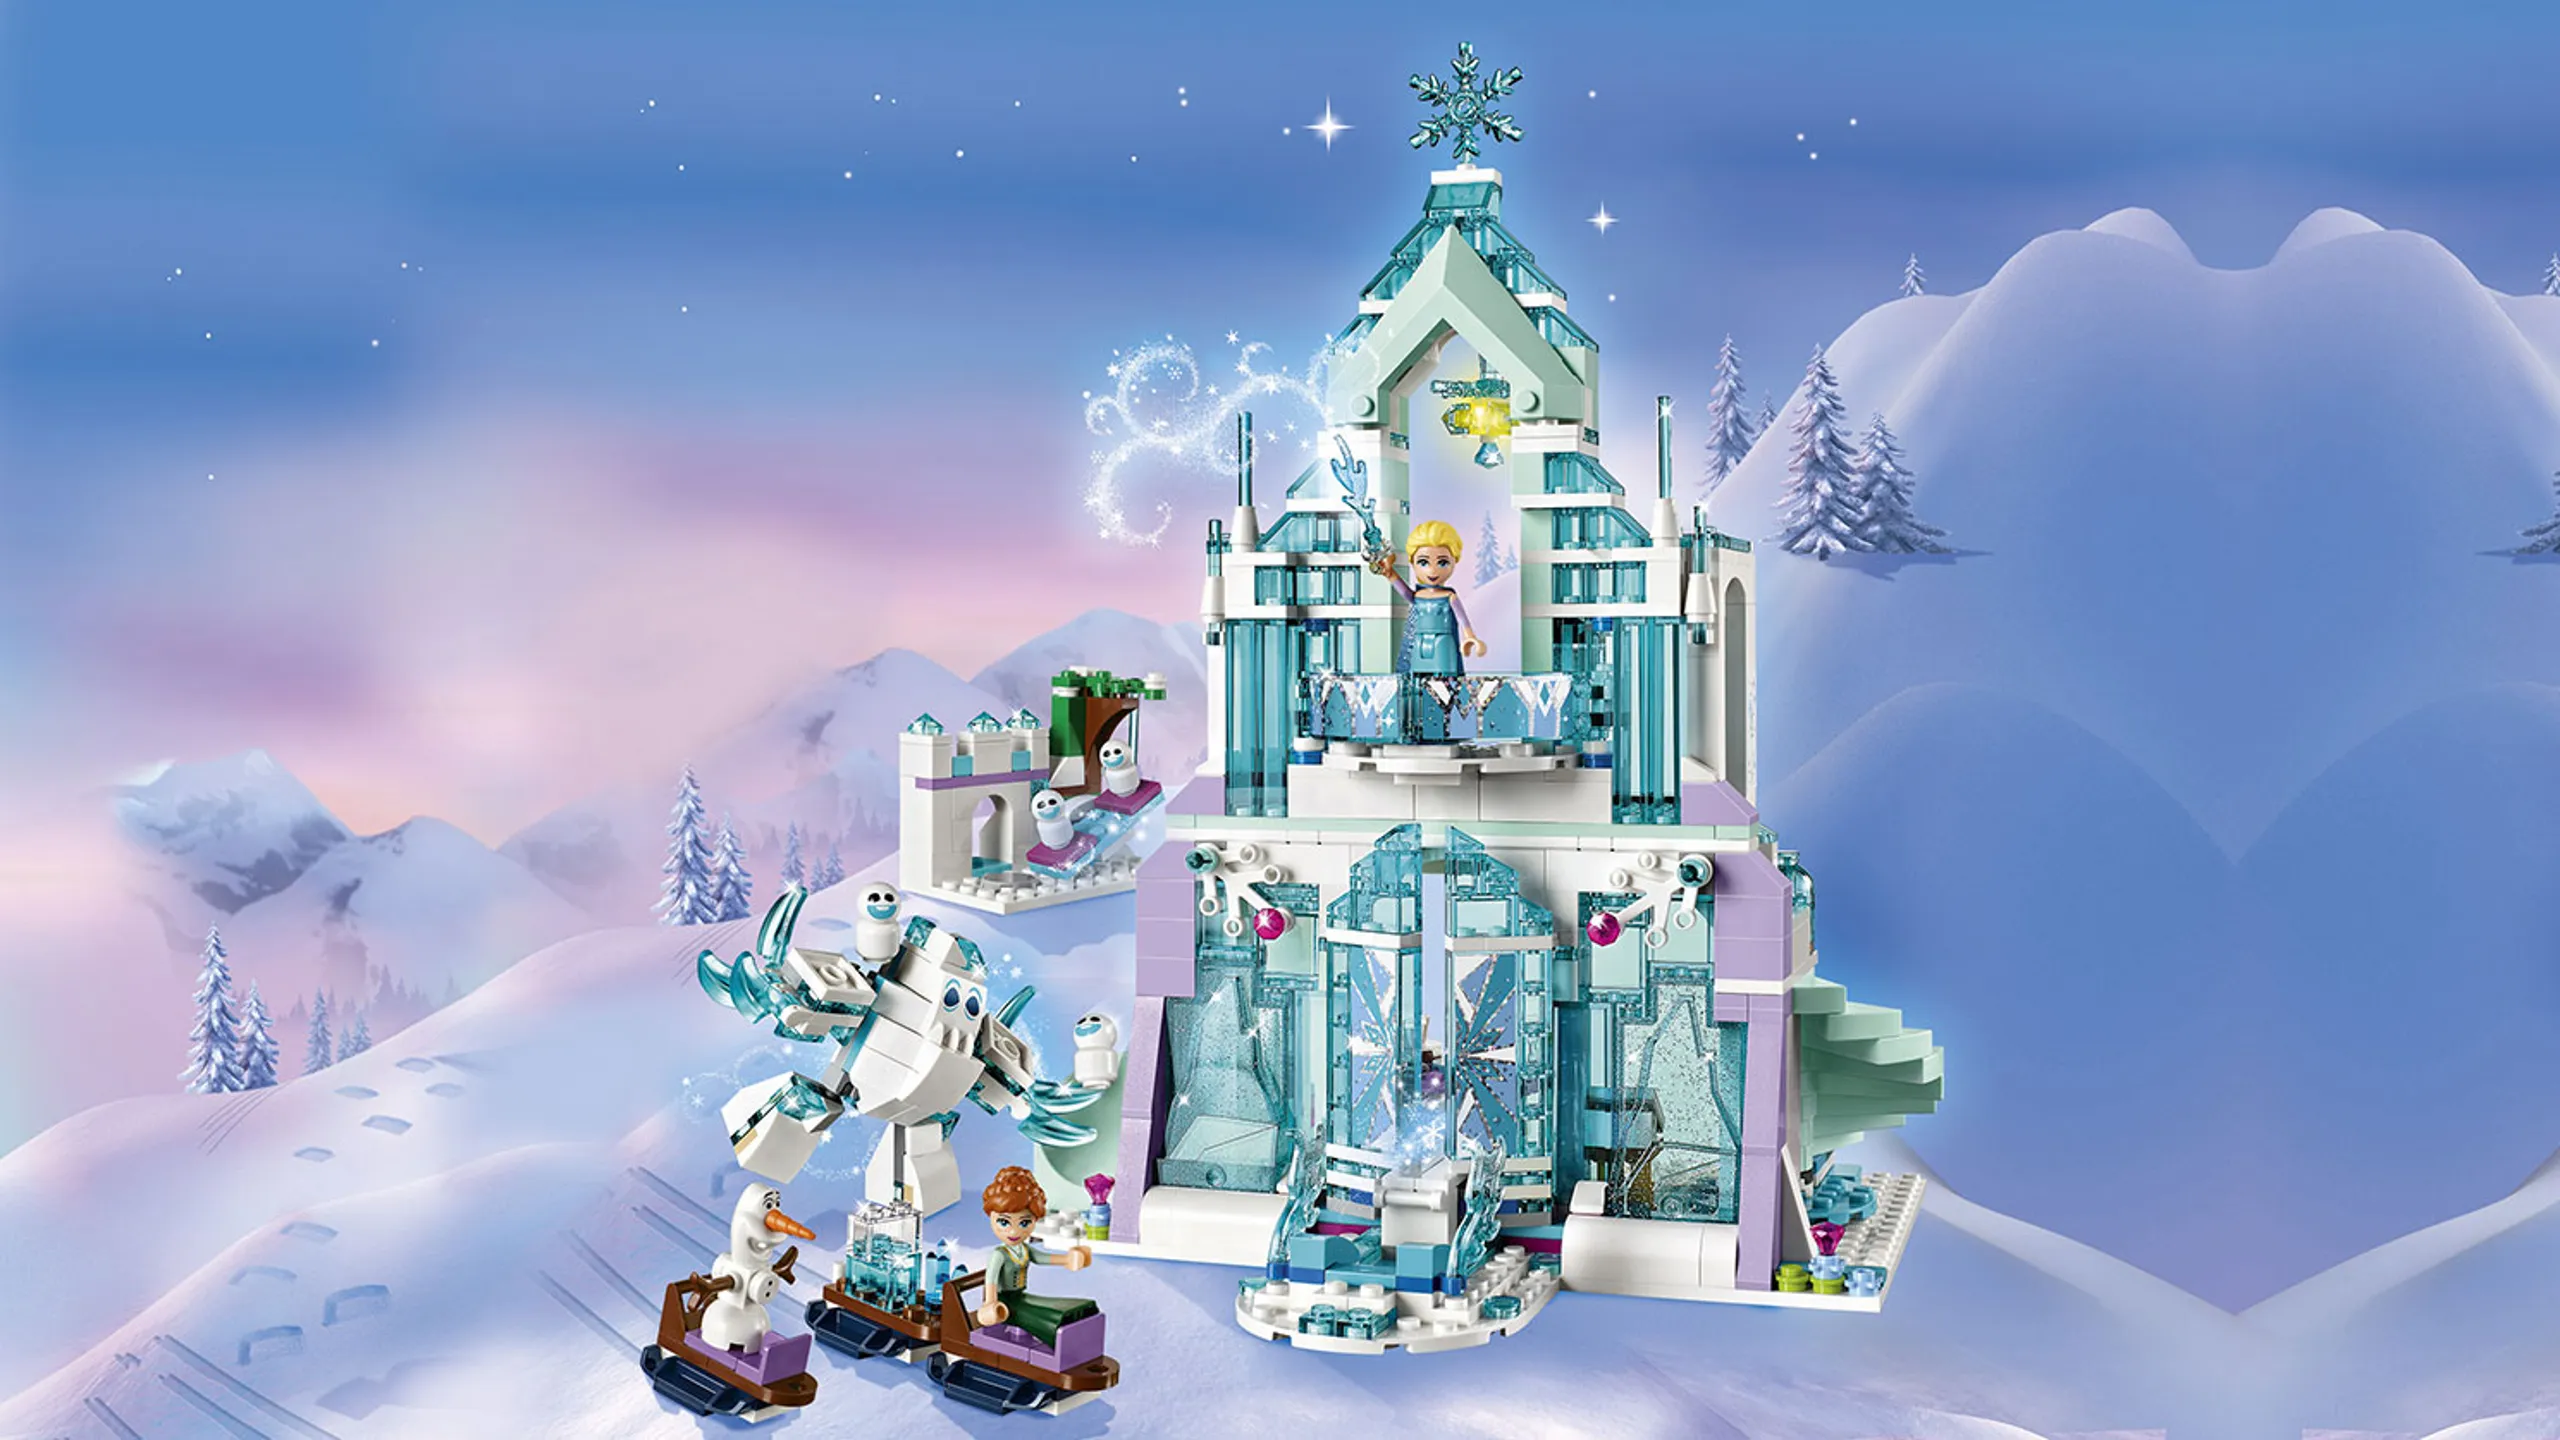 LEGO Disney - 41148 Elsa's Magical Ice Palace - Anna and snowman Olaf rides sleighs to Elsa's Ice Palace to help her use her magical powers.